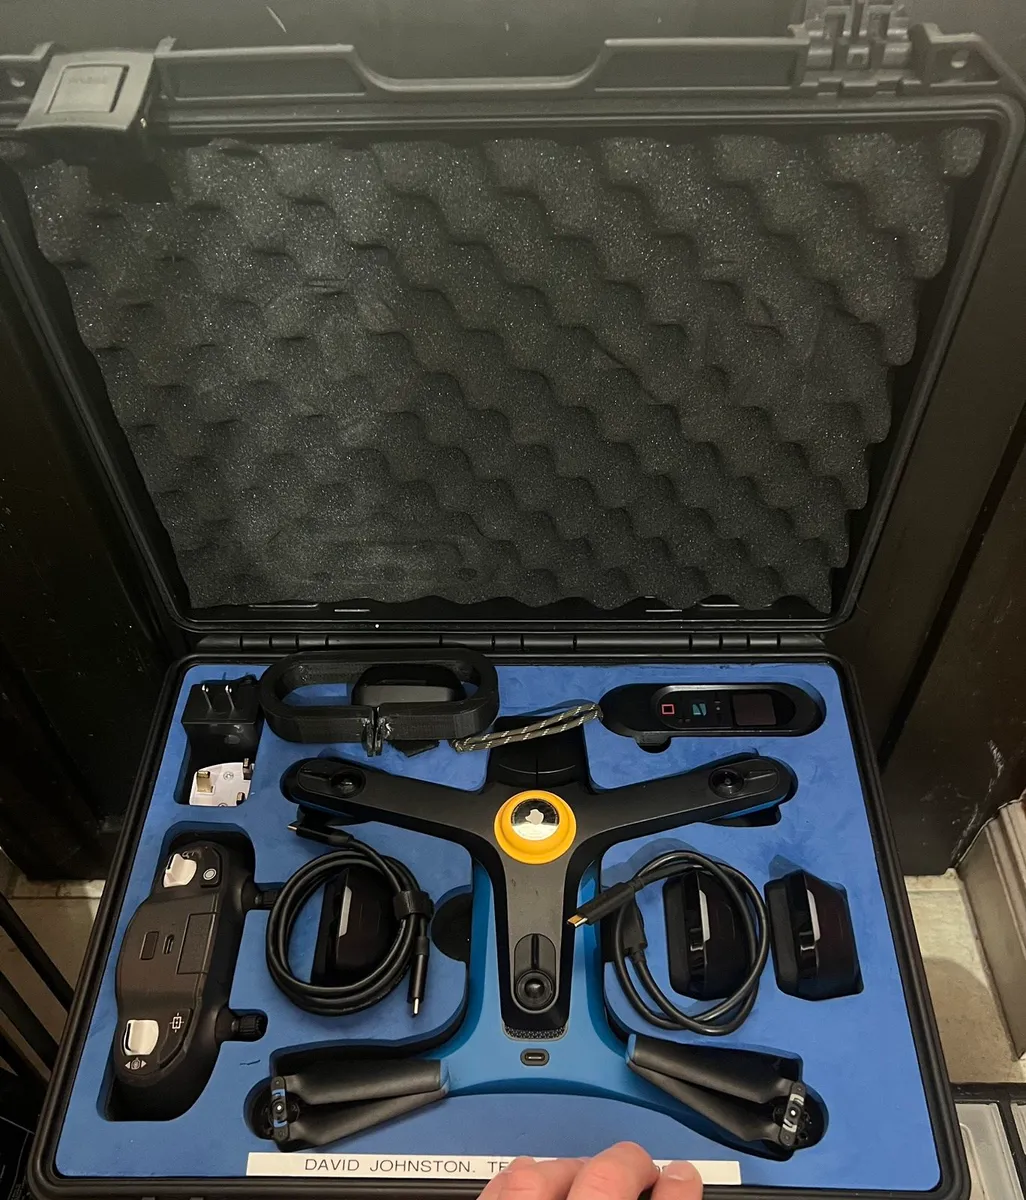 Skydio2 Drone - Price Reduced